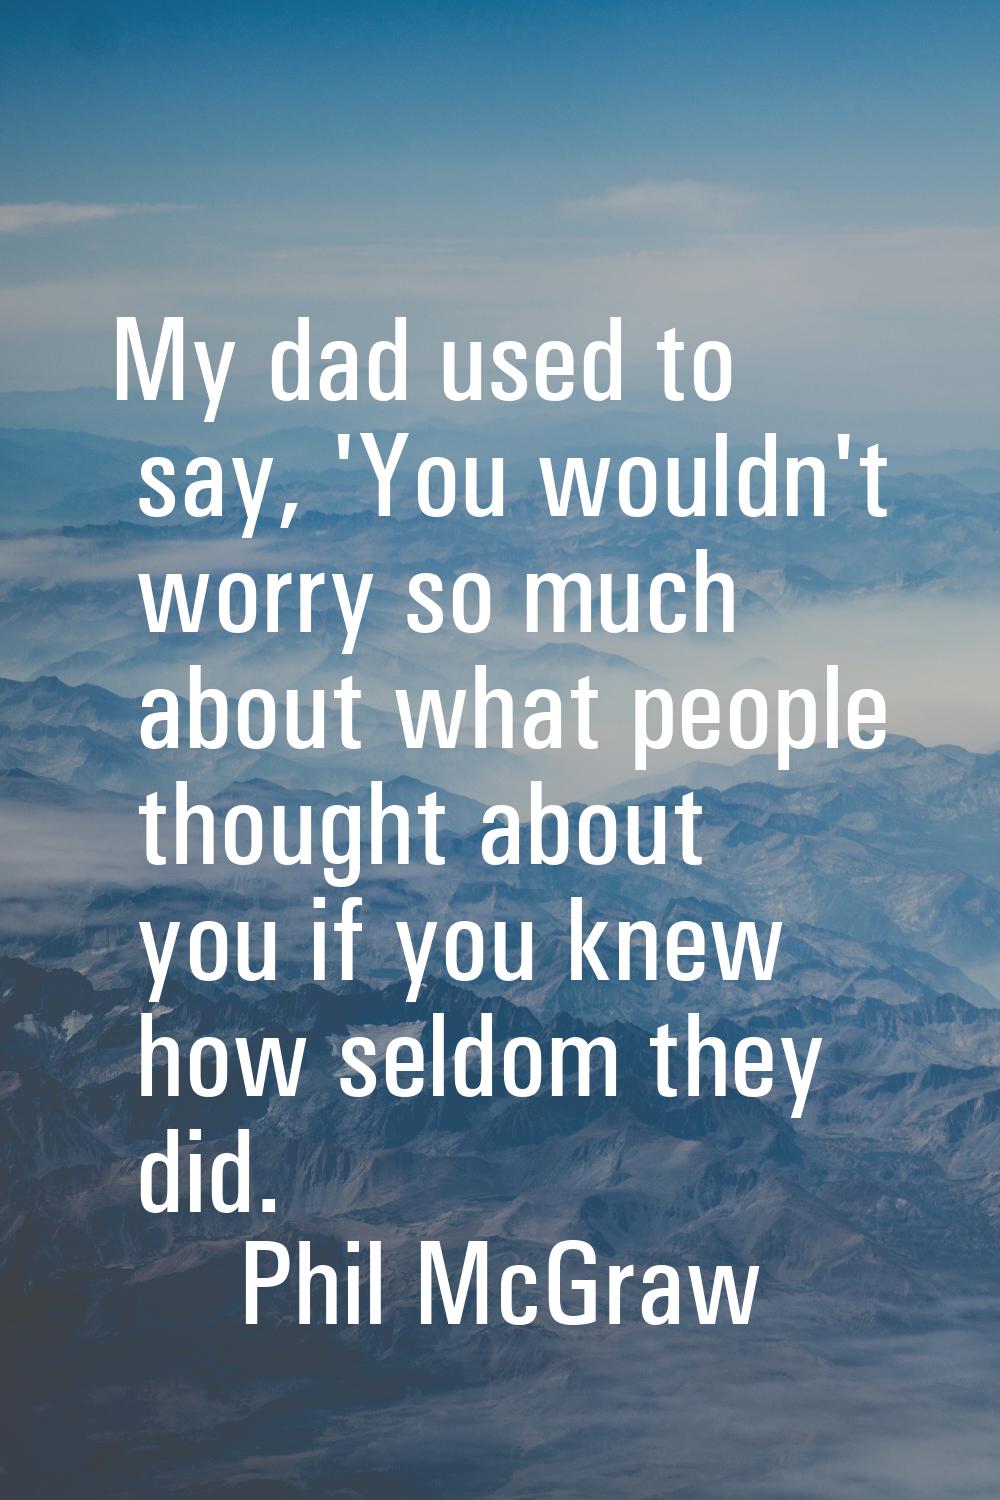 My dad used to say, 'You wouldn't worry so much about what people thought about you if you knew how